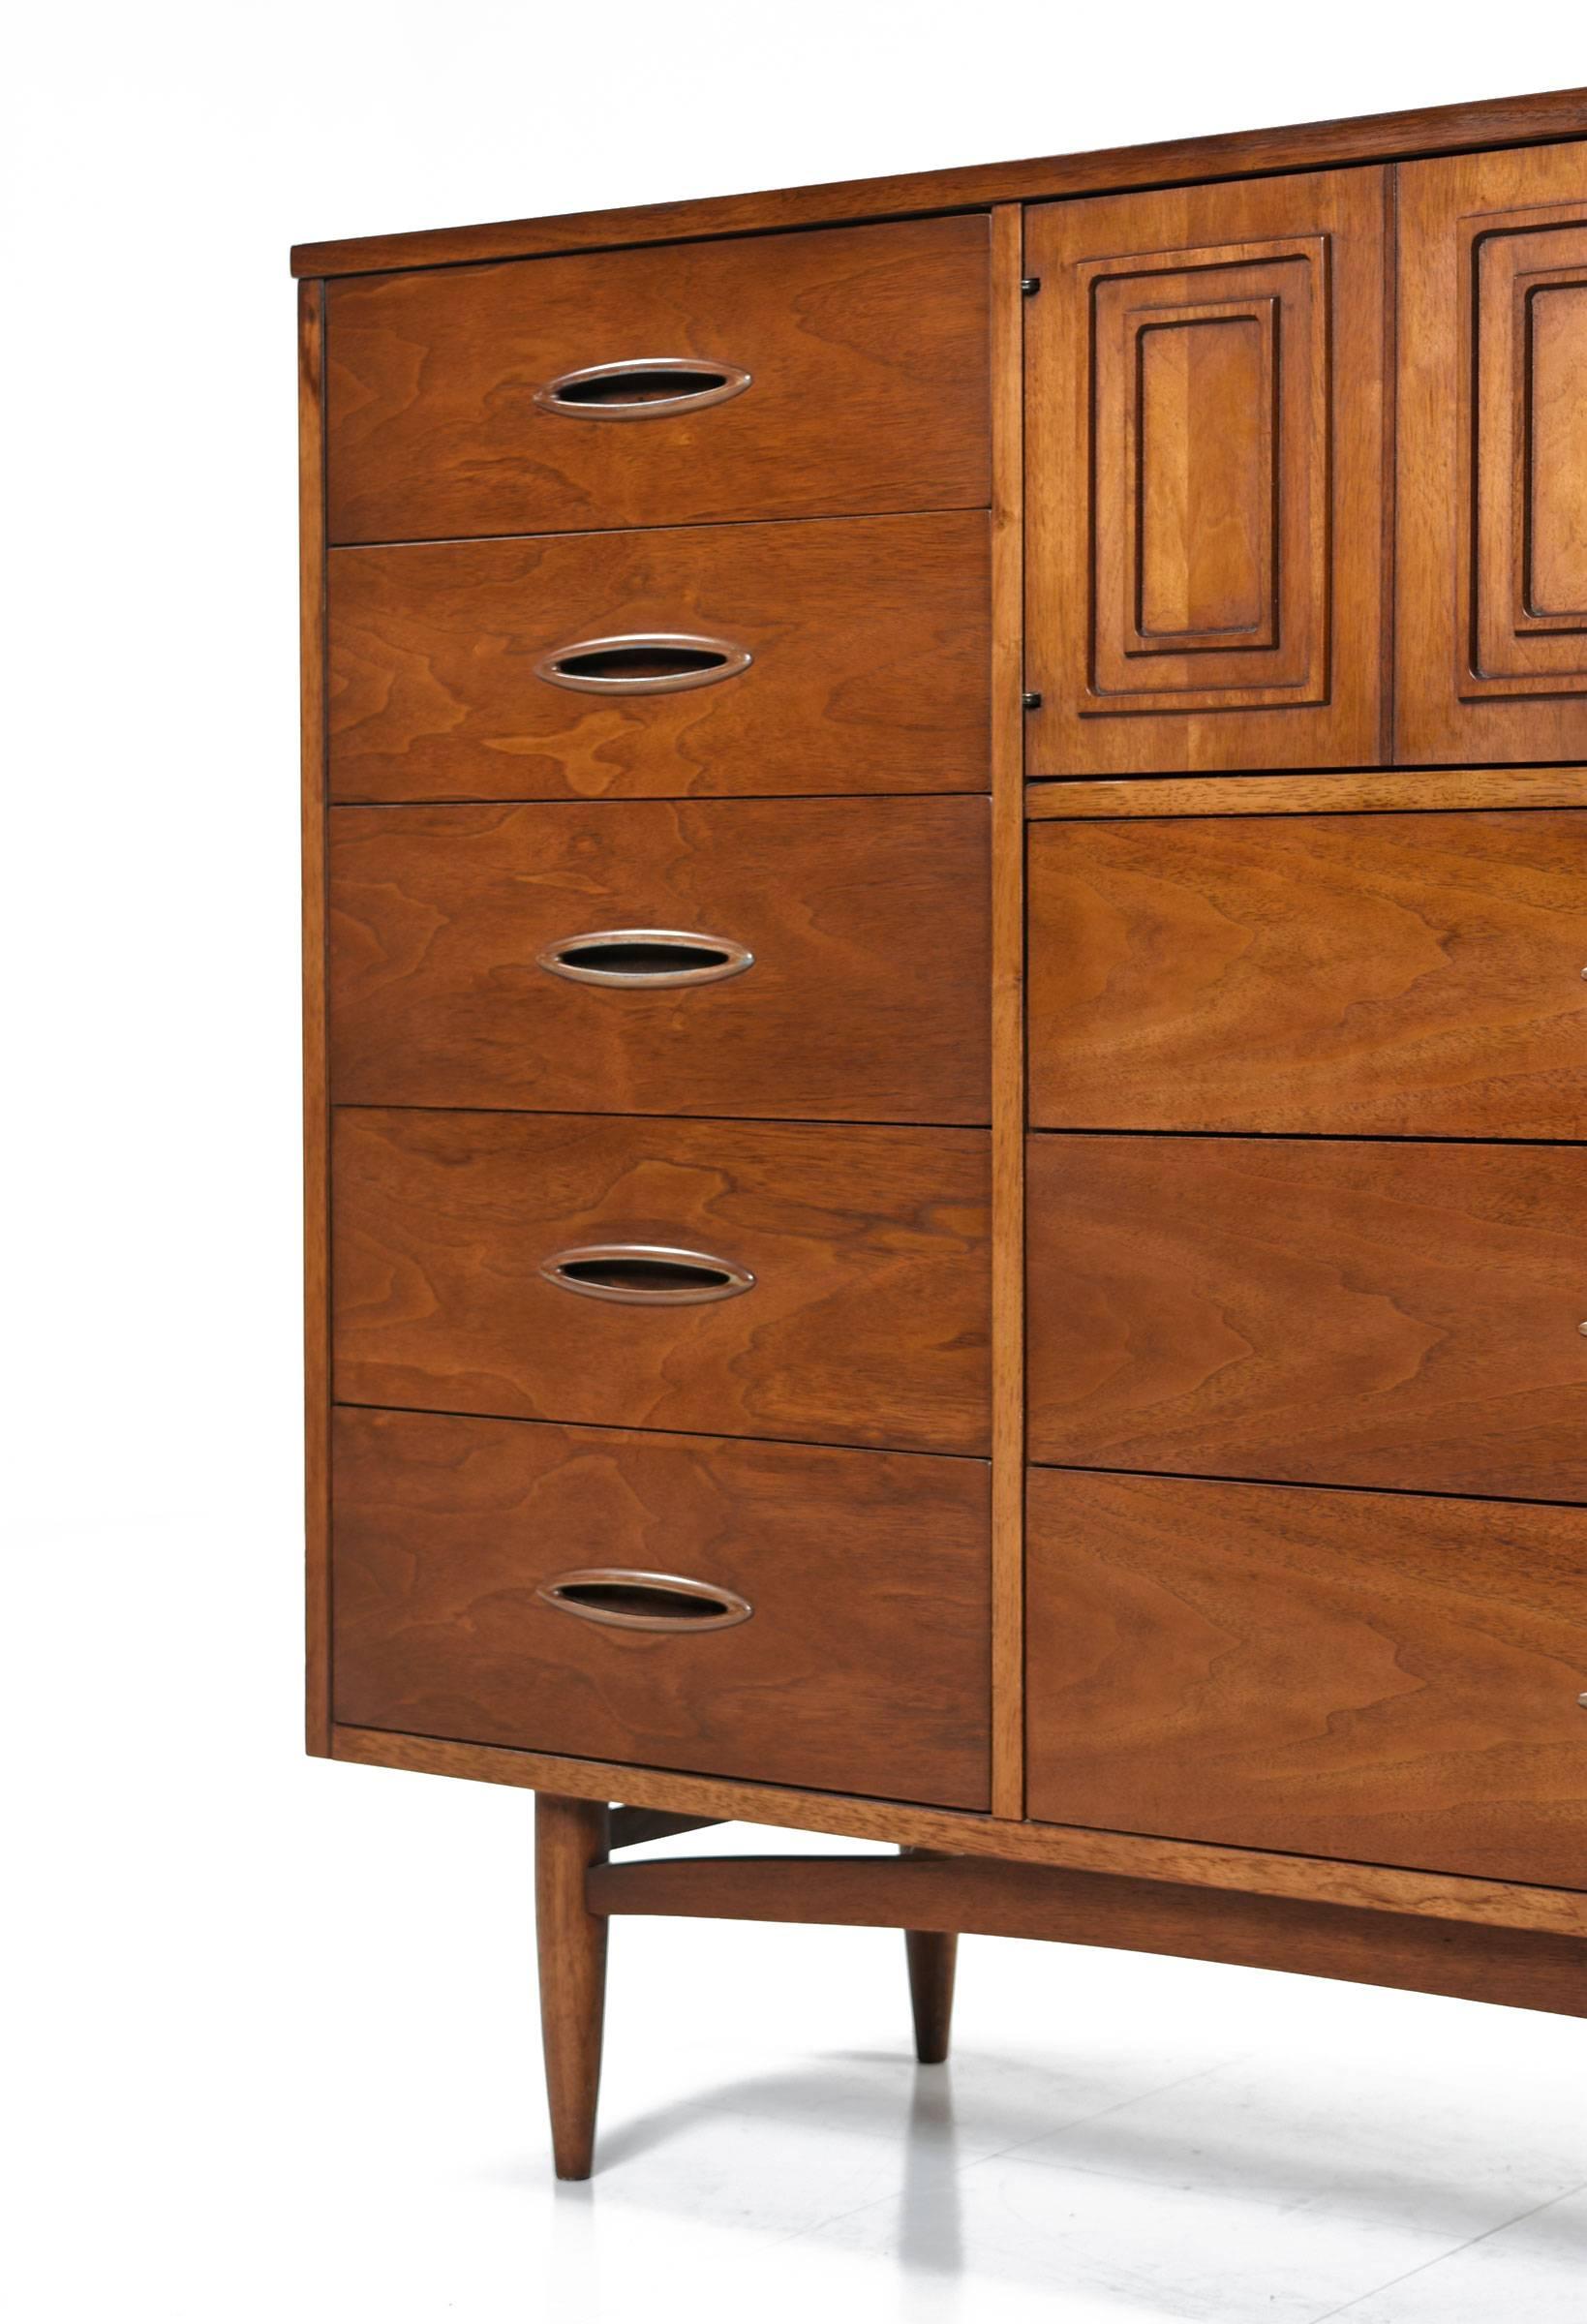 Deep, dark, chocolaty brown patina to the walnut wood. This huge magna dresser is like having a standalone closet and dresser in one. The top row features a cabinet with three divided compartments. The right side has a column of five deep drawers.